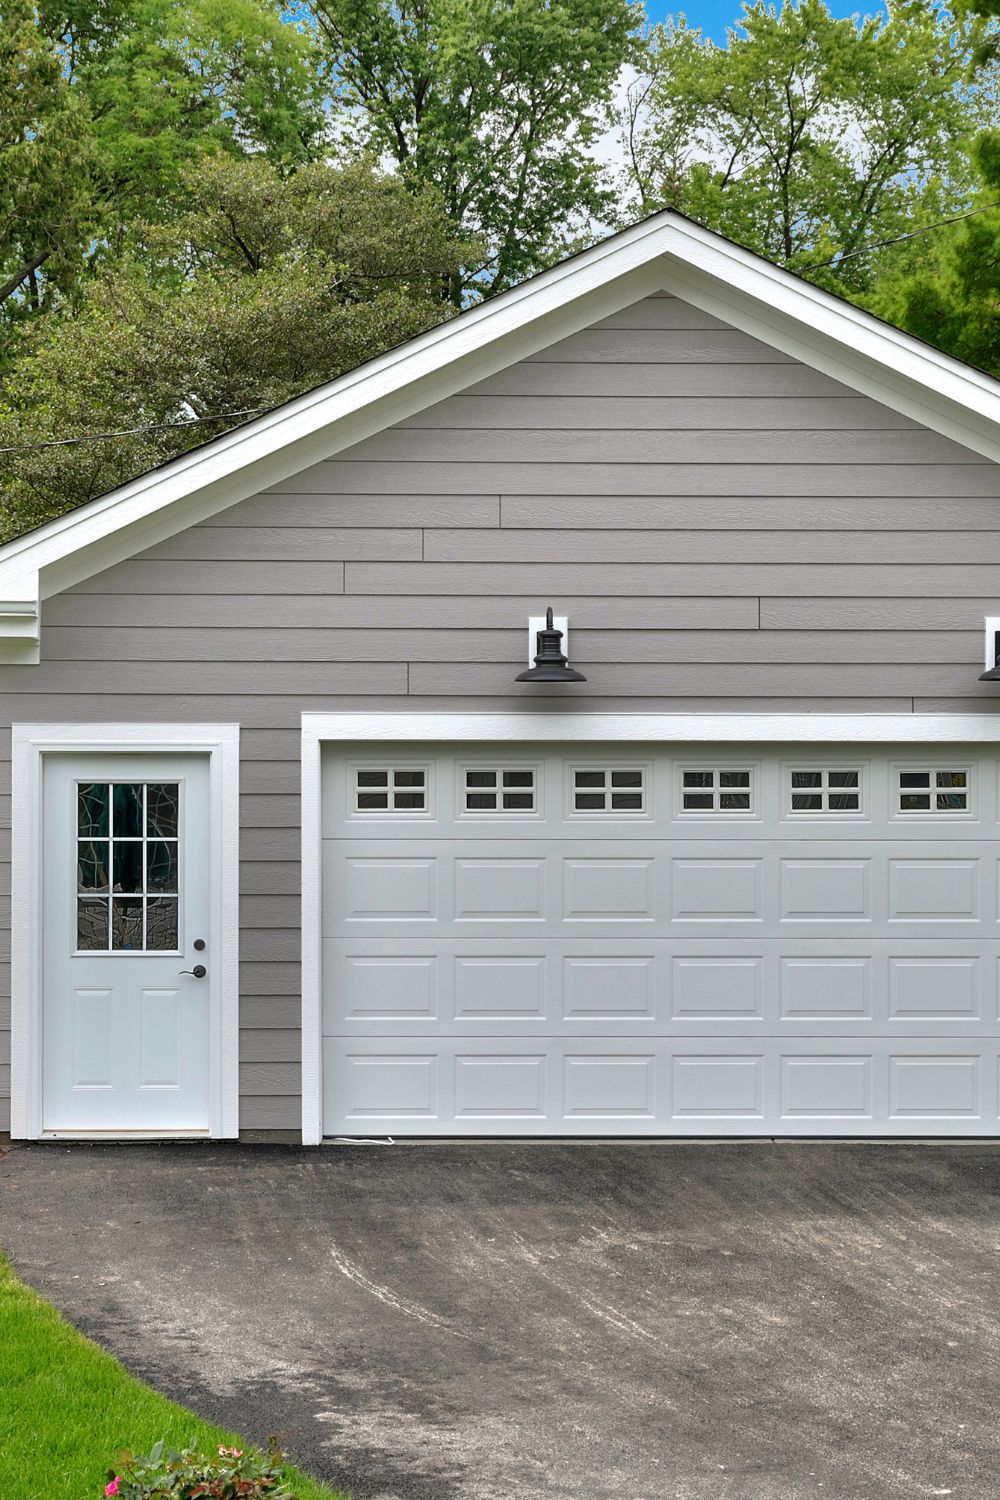 Four Creative Garage Conversions That Could Unlock So Much Potential